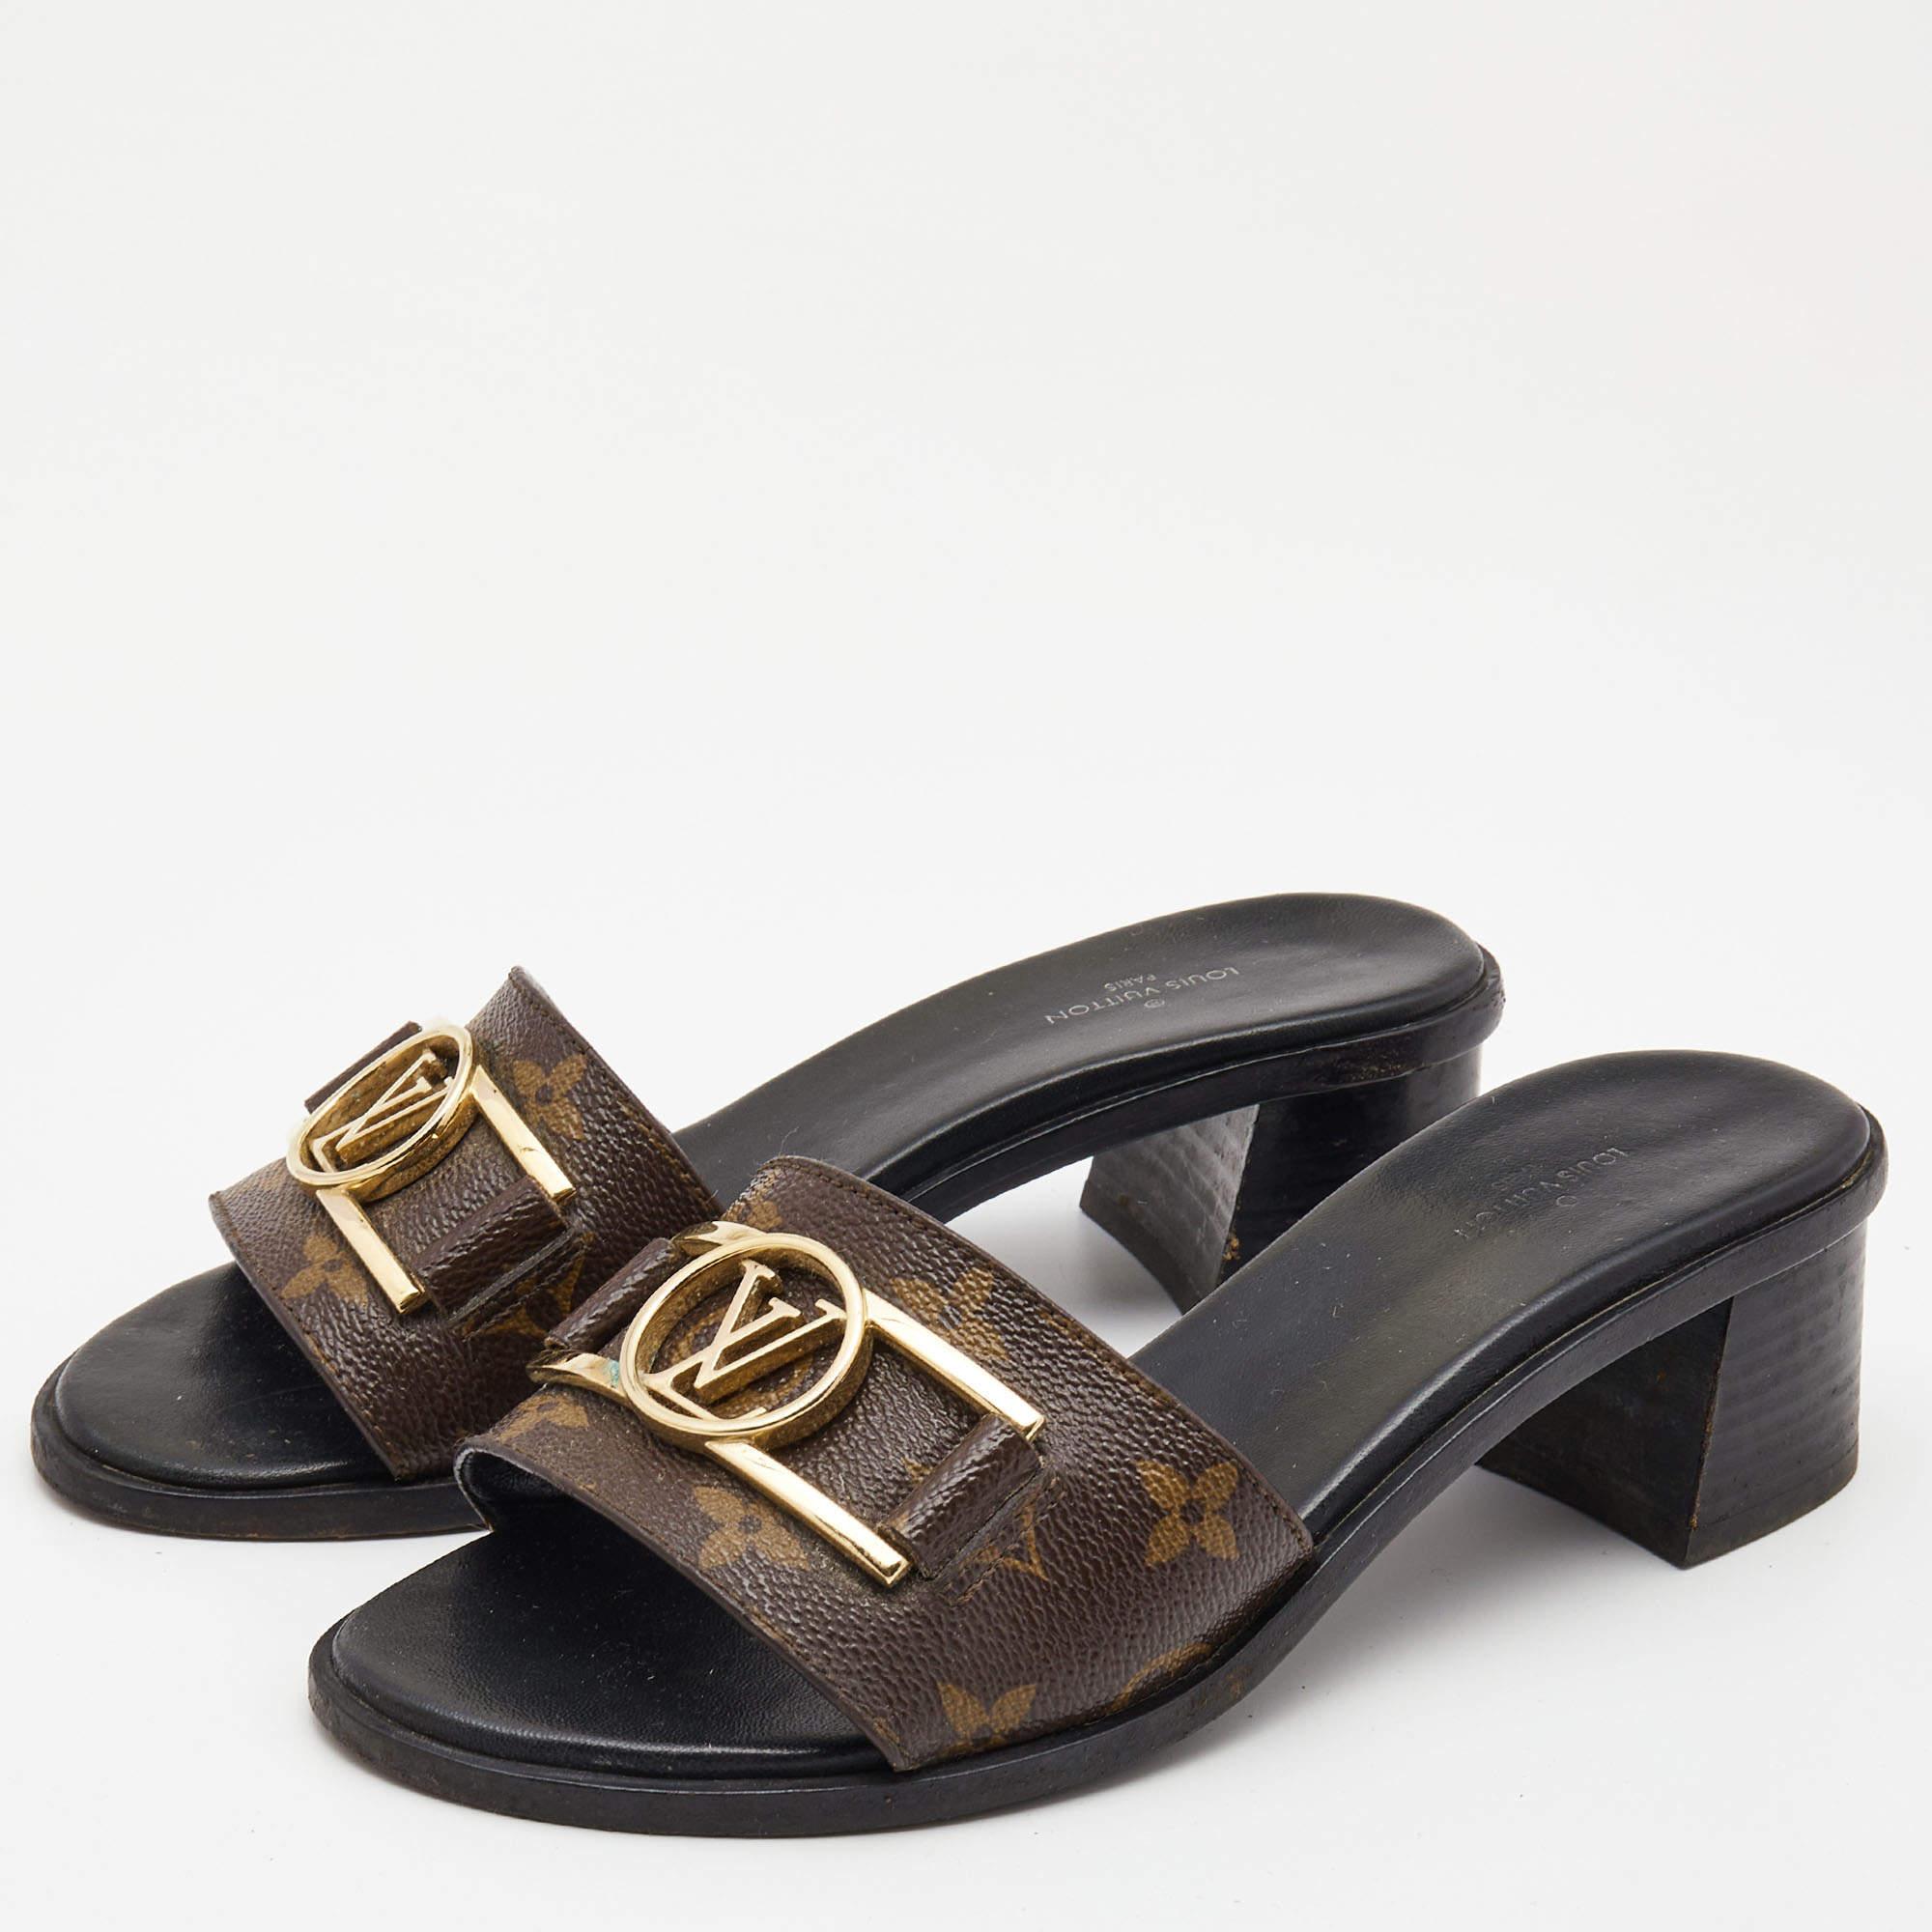 Louis Vuitton - Authenticated Lock It Sandal - Leather Brown for Women, Never Worn